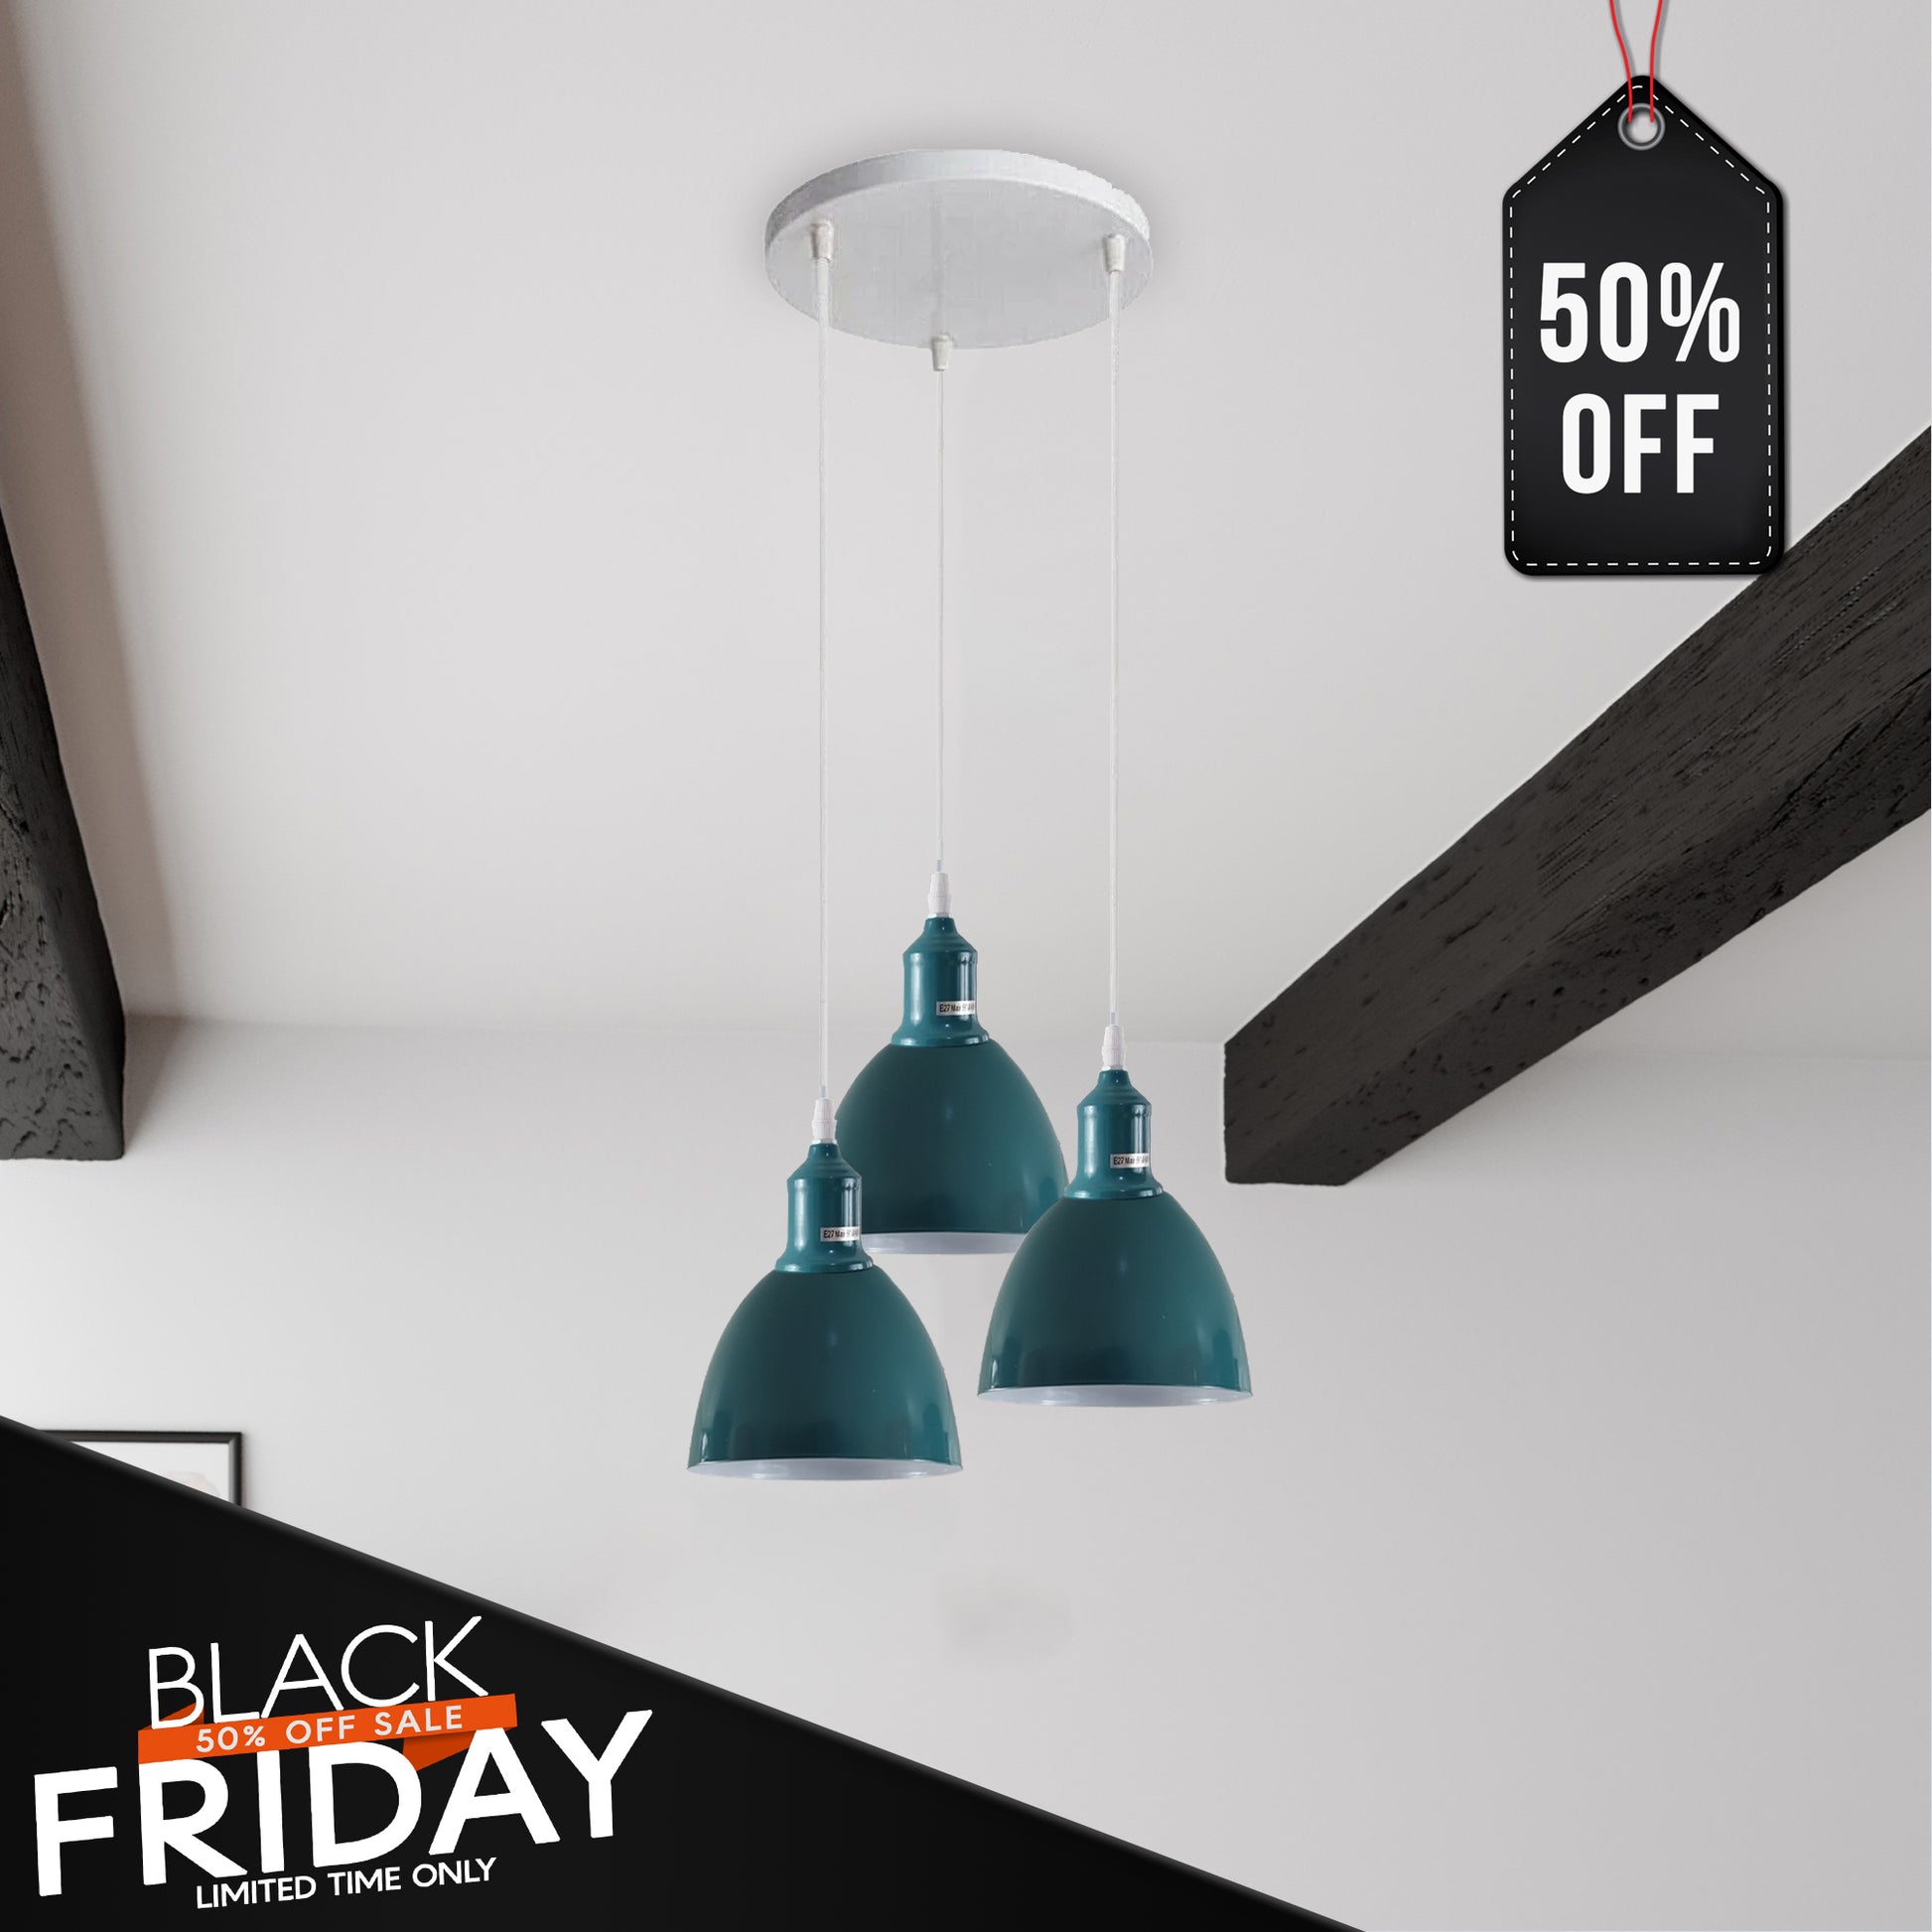 Industrial 3Way Retro Cluster Ceiling Pendent E27 Lamp|Ledsone.co.uk